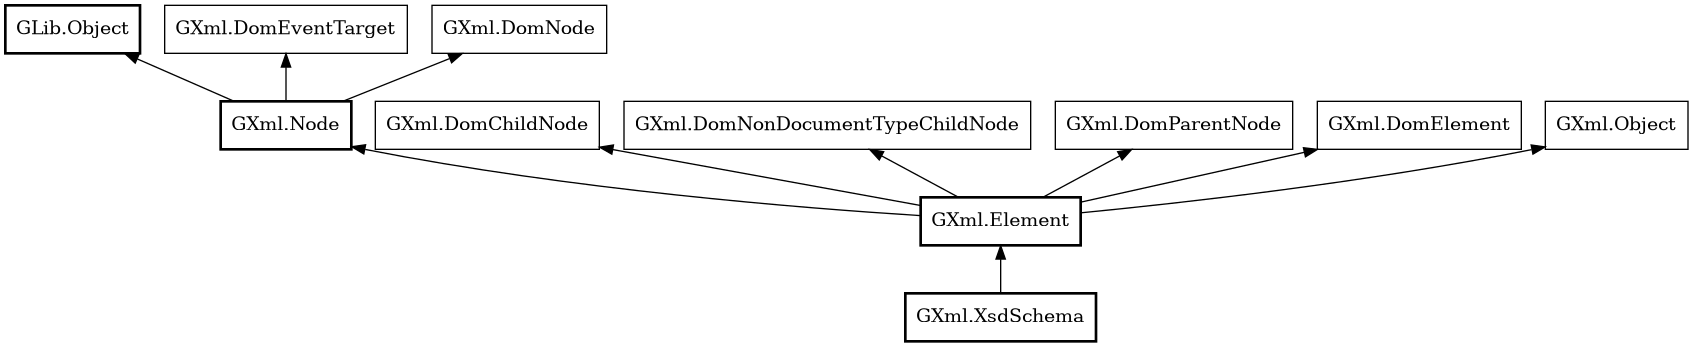 Object hierarchy for XsdSchema